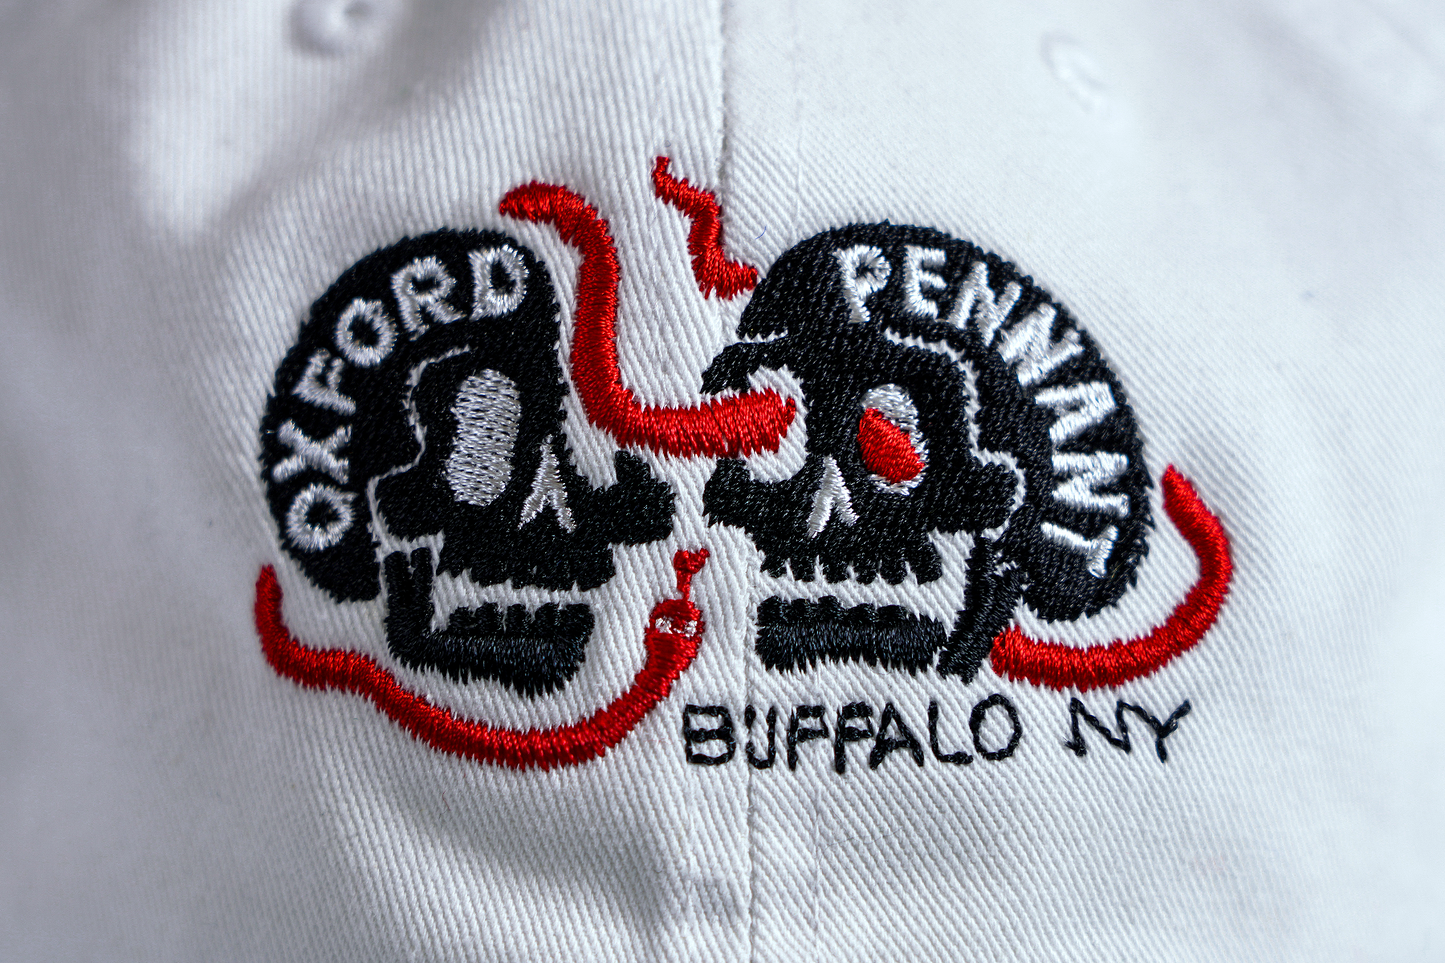 Oxford Pennant Skull White Dad Hat